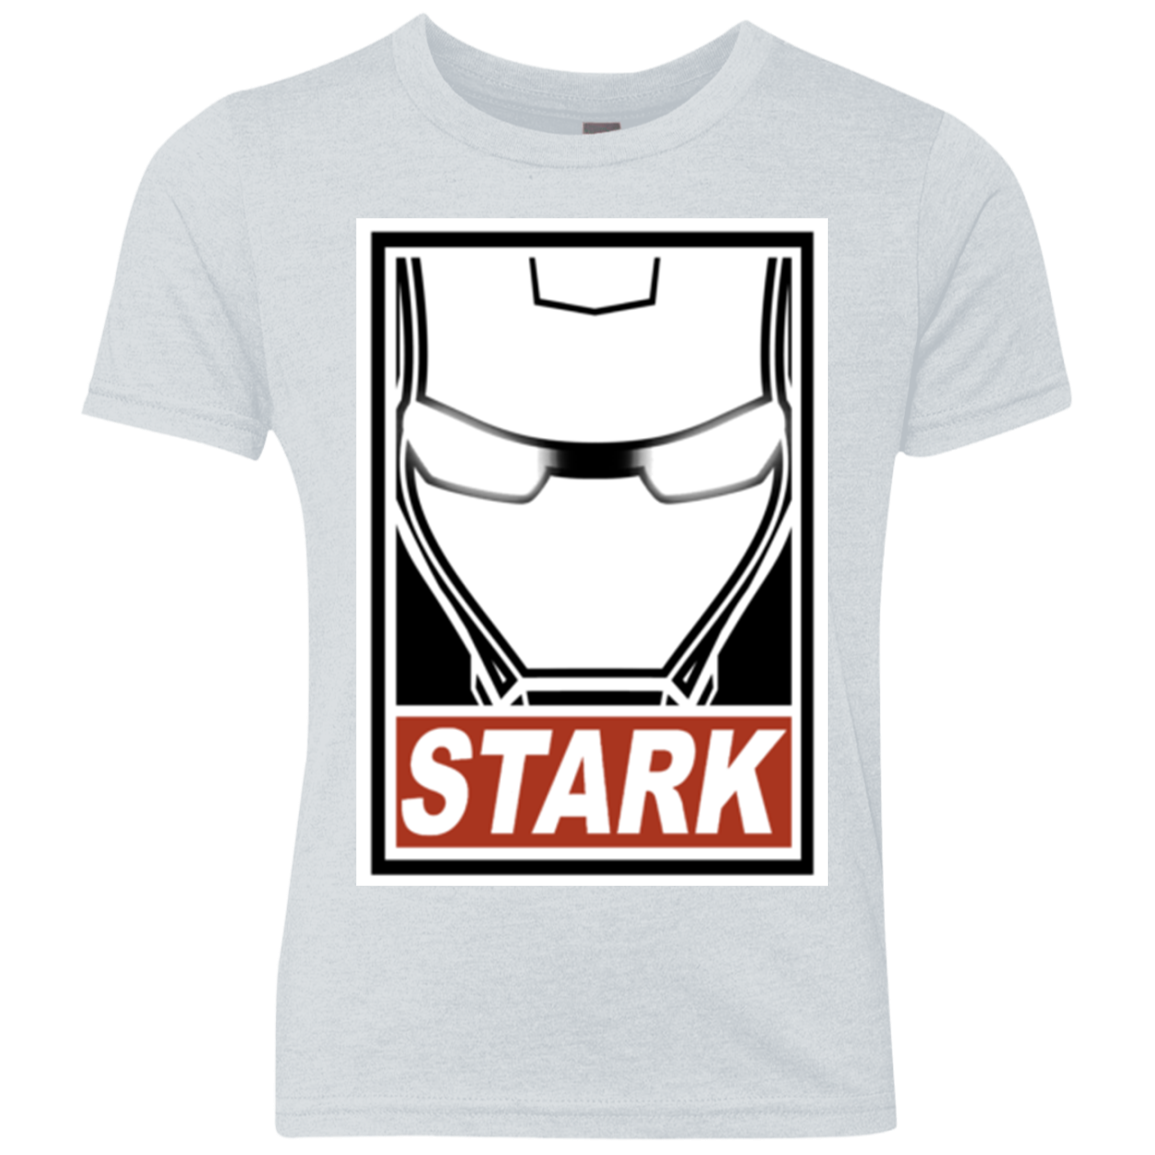 Obey Stark Youth Triblend T-Shirt